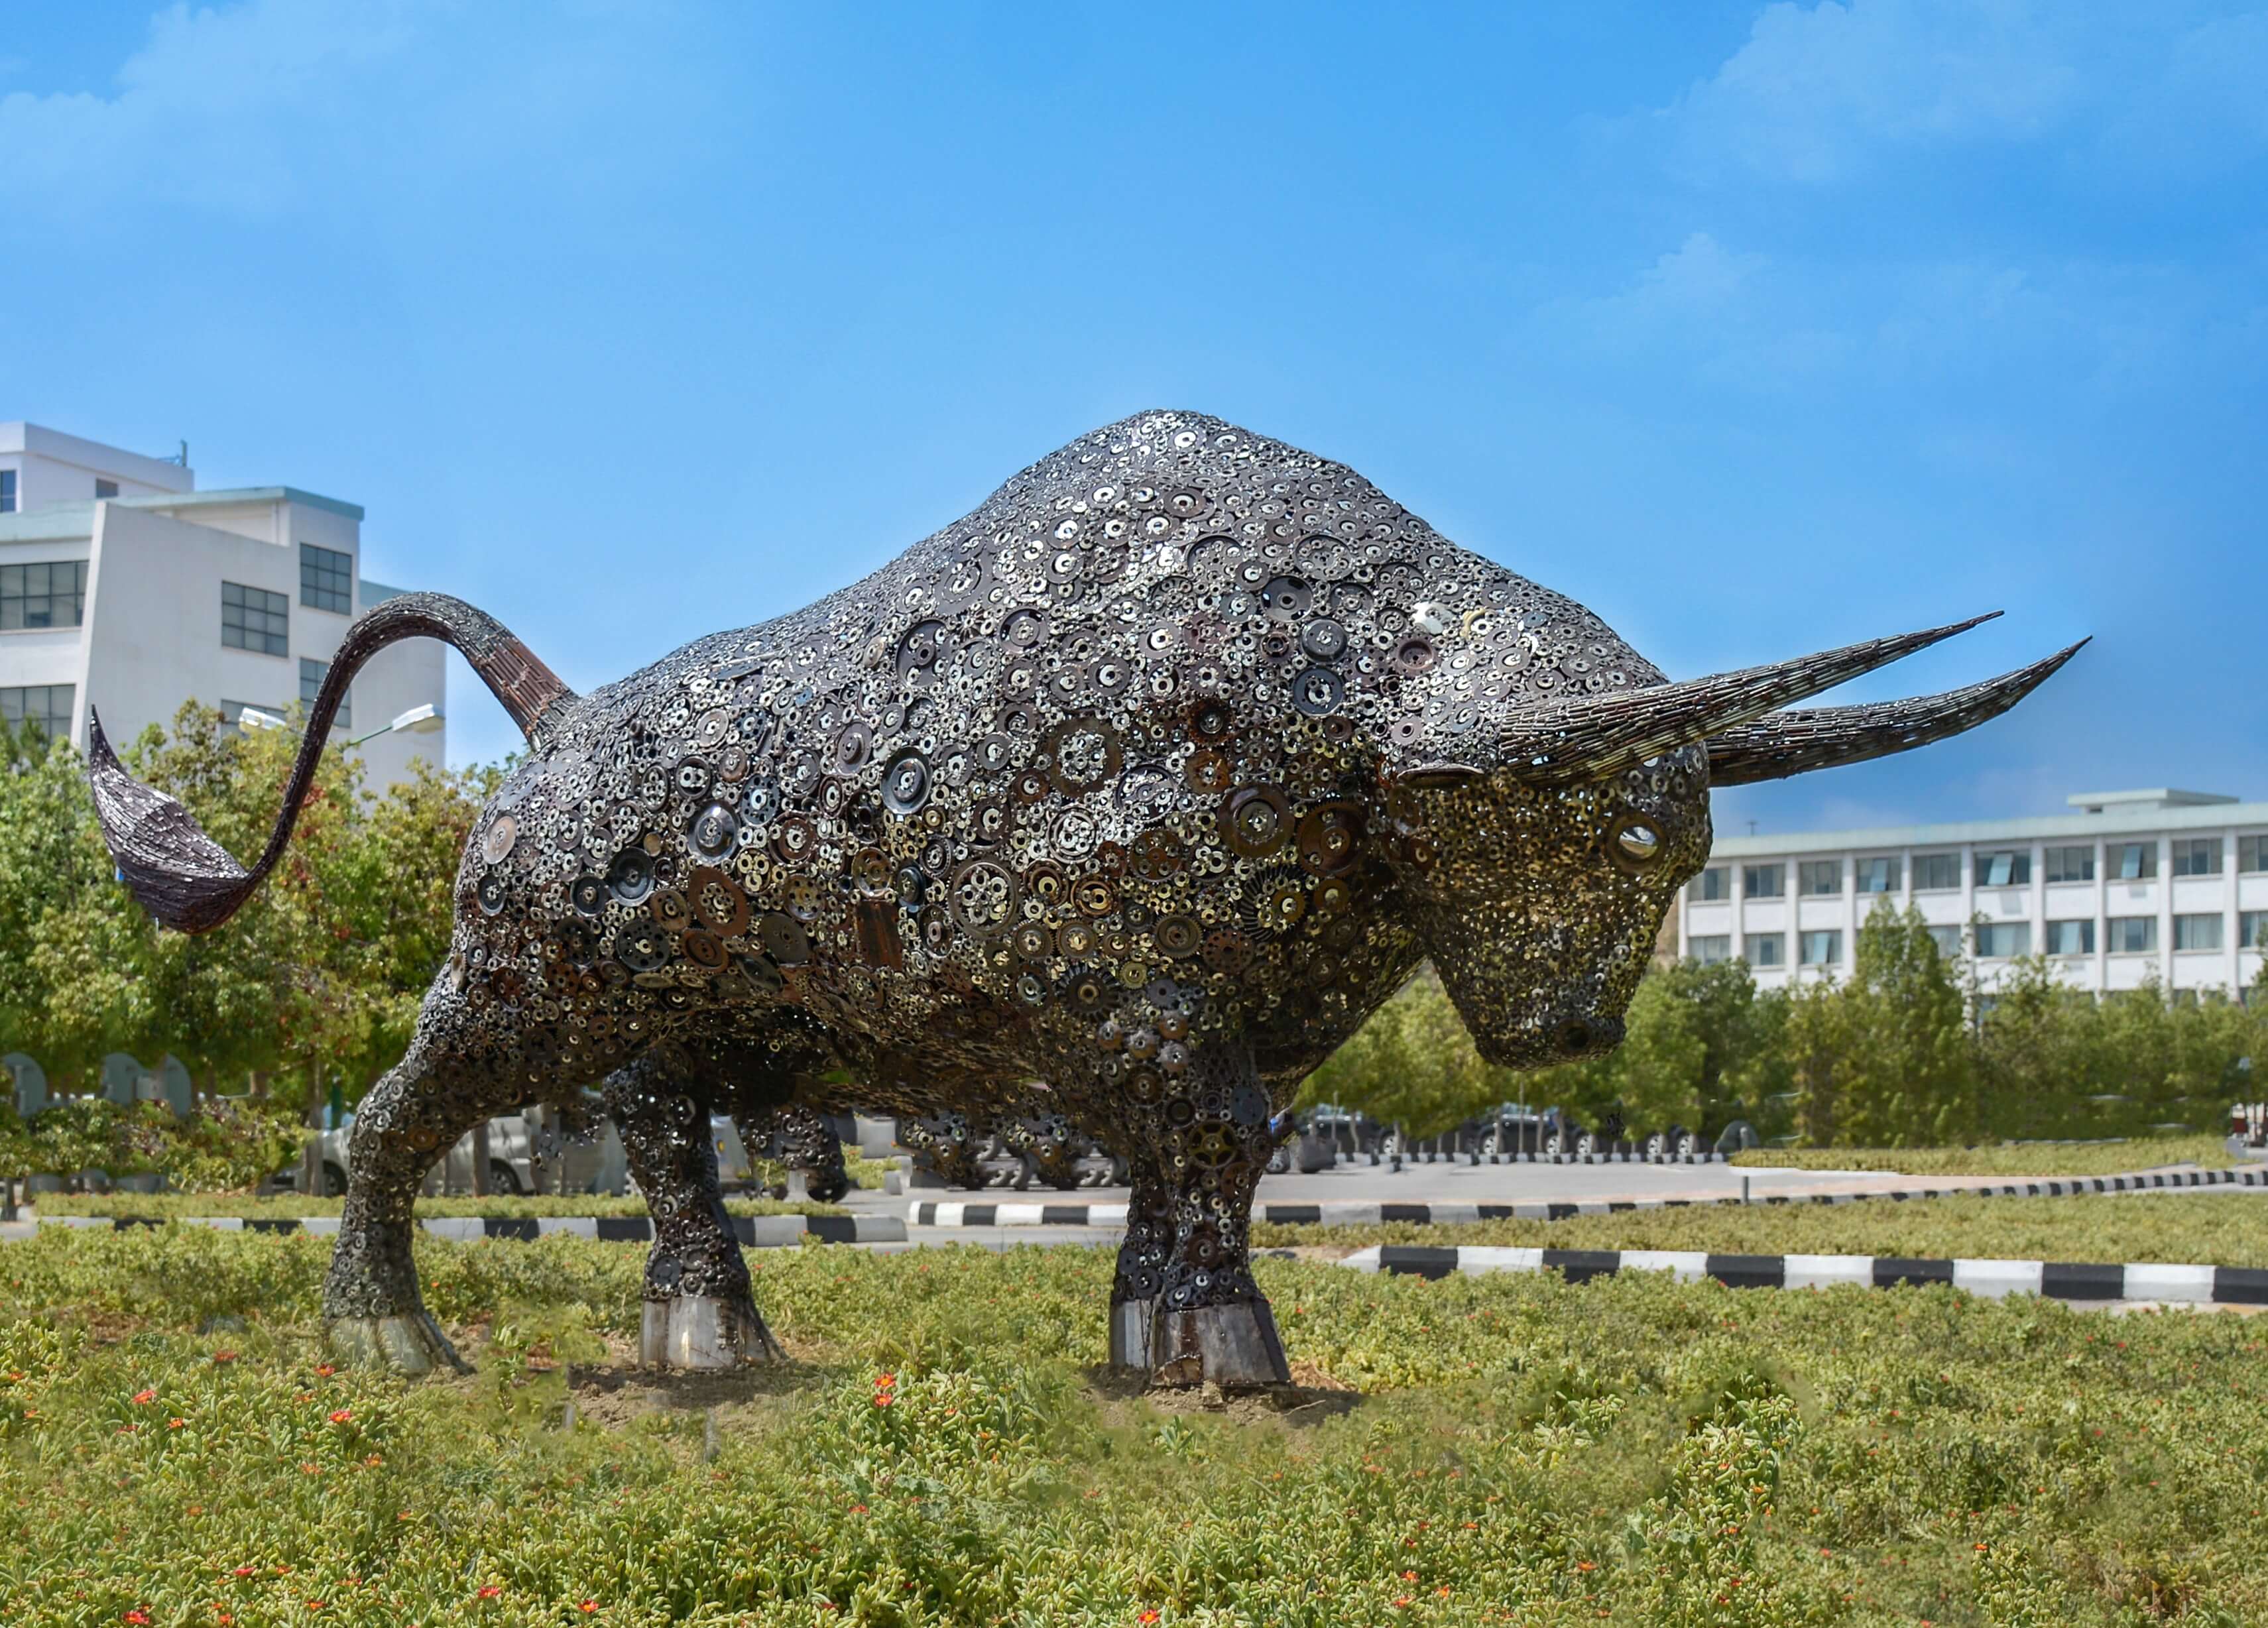 The Art of Reproduction … The Metal Bull Sculpture Made of Tens of Thousands Particles is exhibited on the Near East University campus